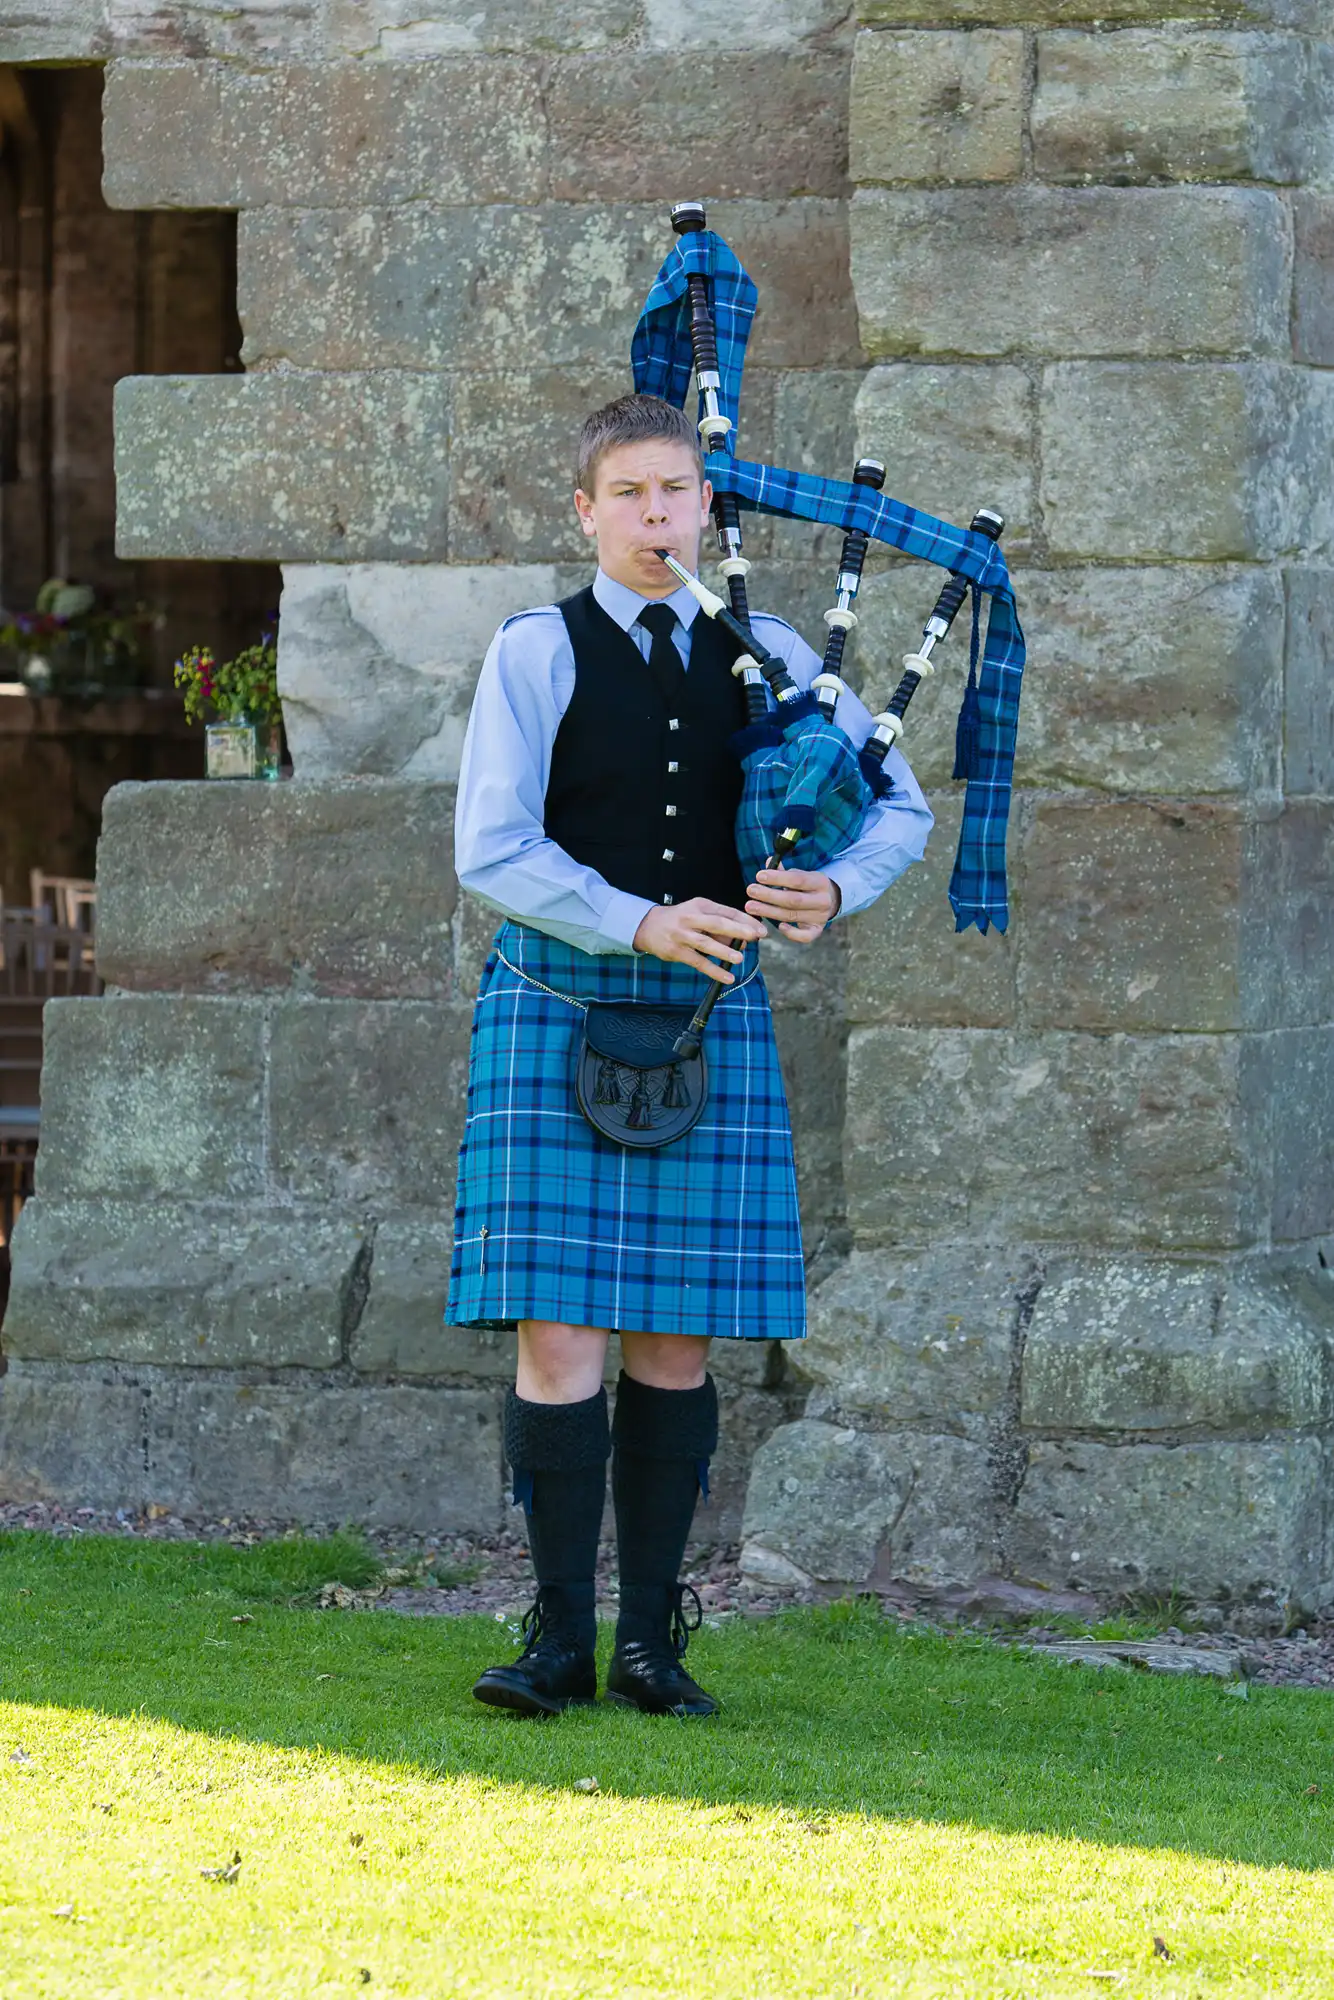 A young man in traditional scottish attire, including a kilt and sporran, playing the bagpipes outdoors by a stone wall.